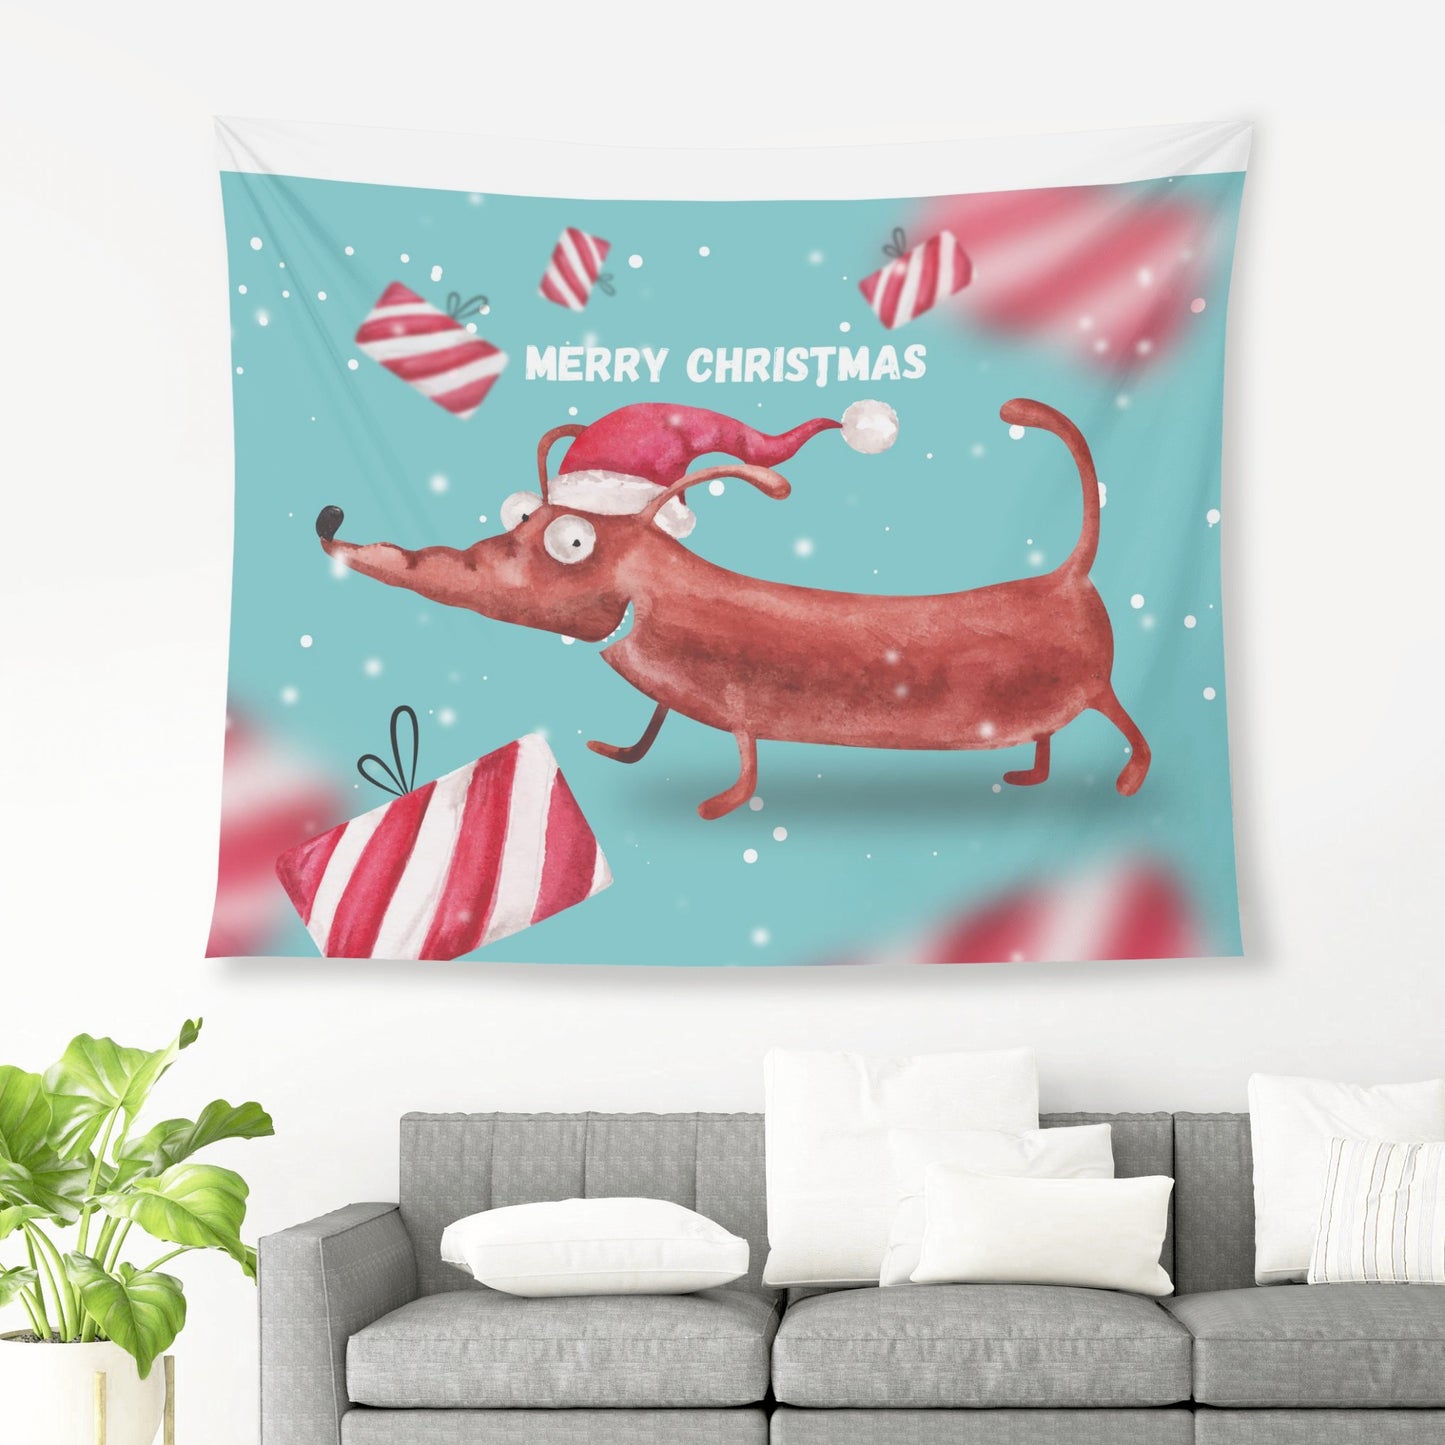 Hot Dog It is Christmas Time Polyester Peach Skin Wall Tapestry 6 Sizes